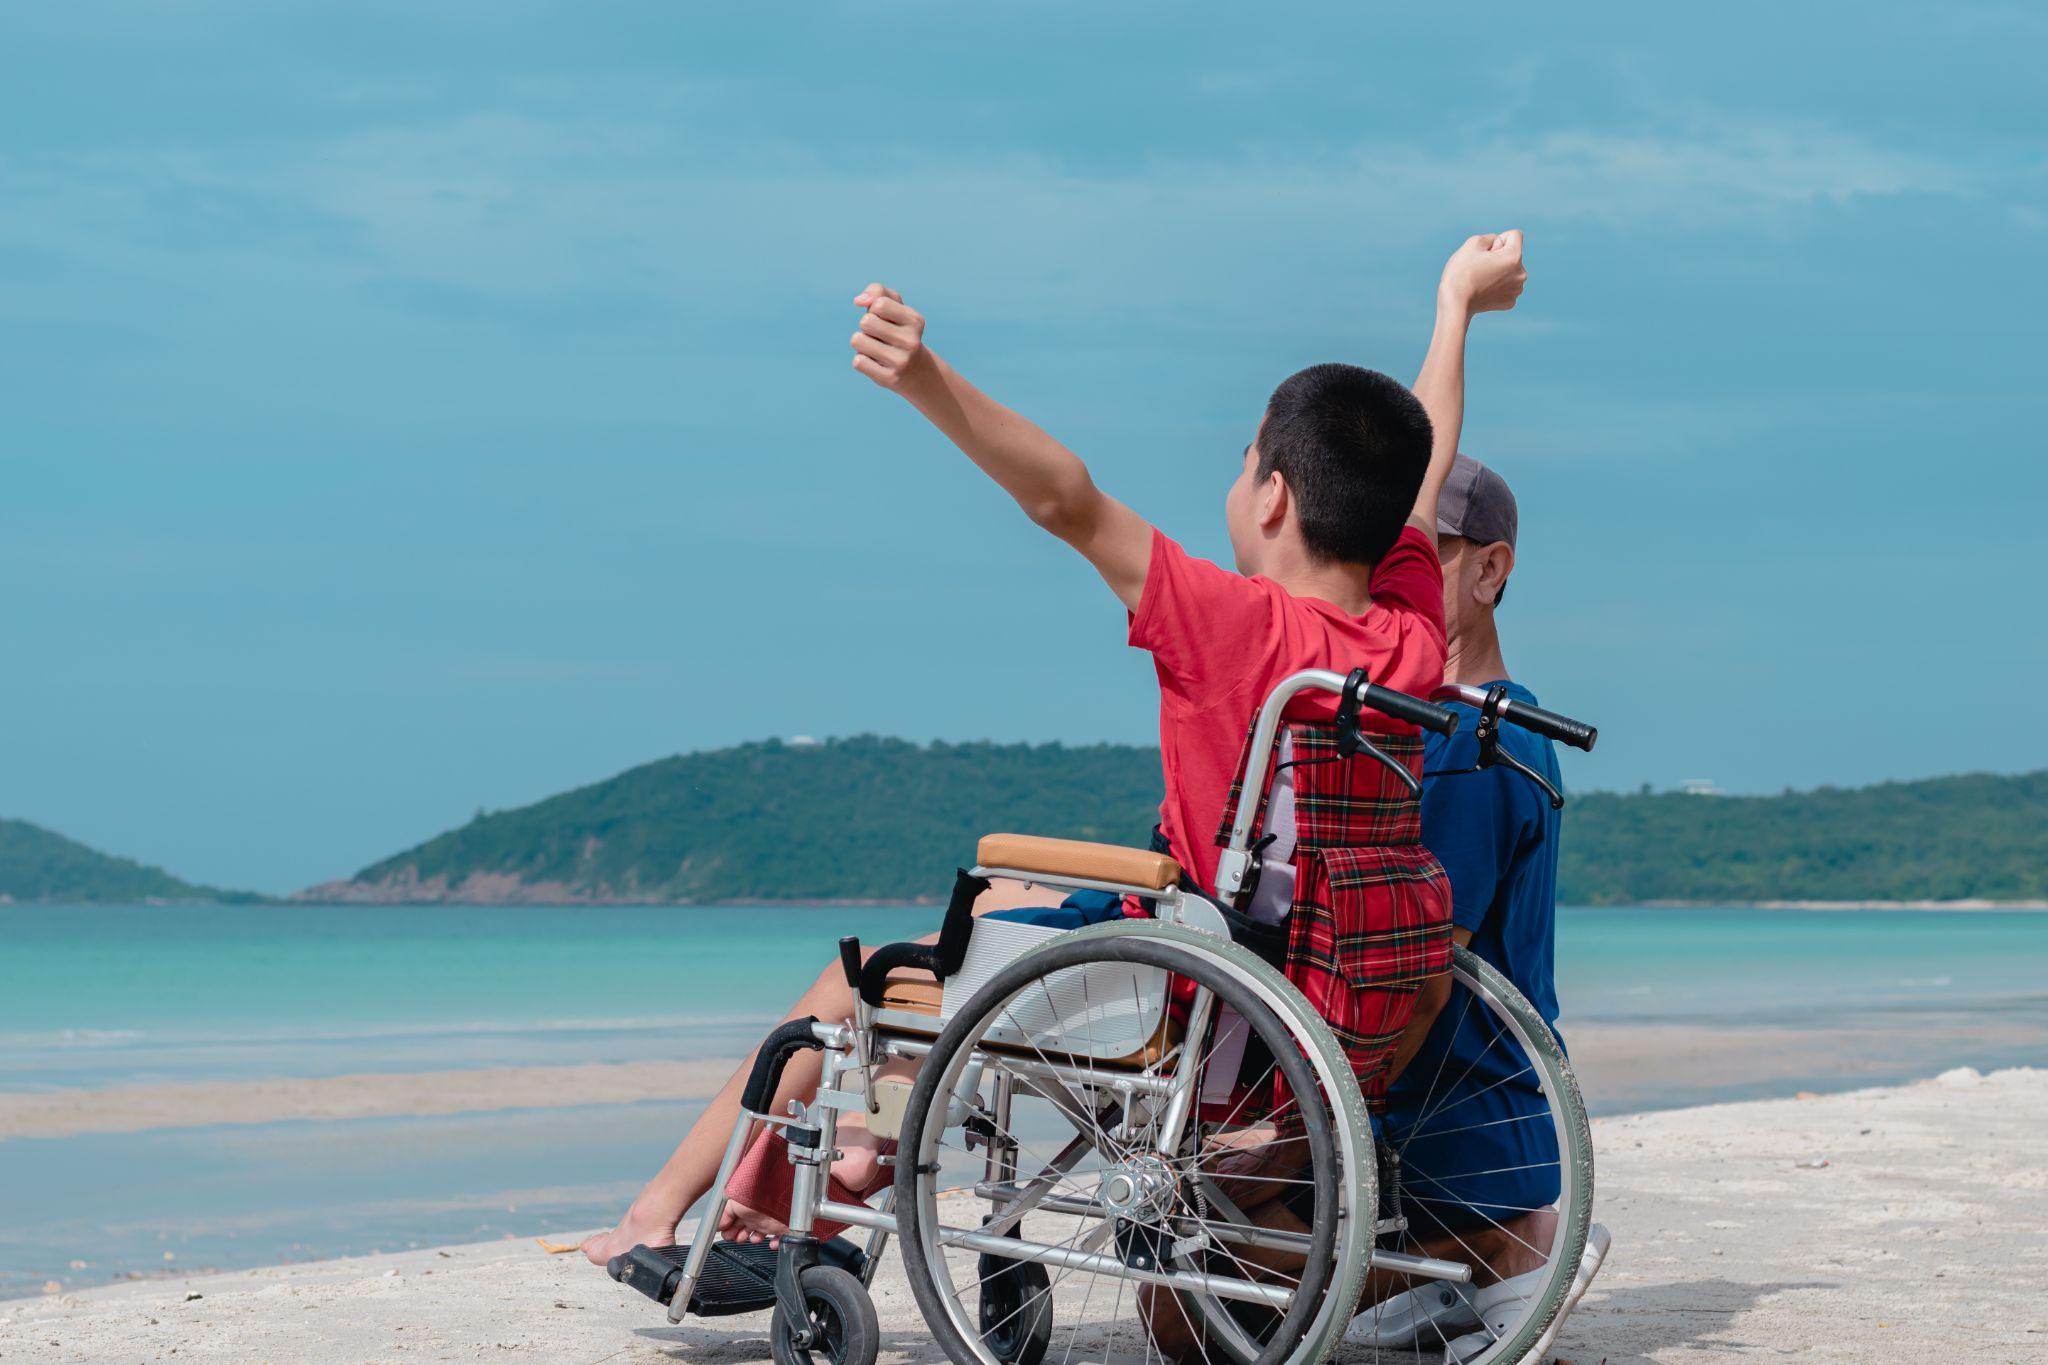 Asian special child on wheelchair is smiling, playing, doing activity on sea beach with father